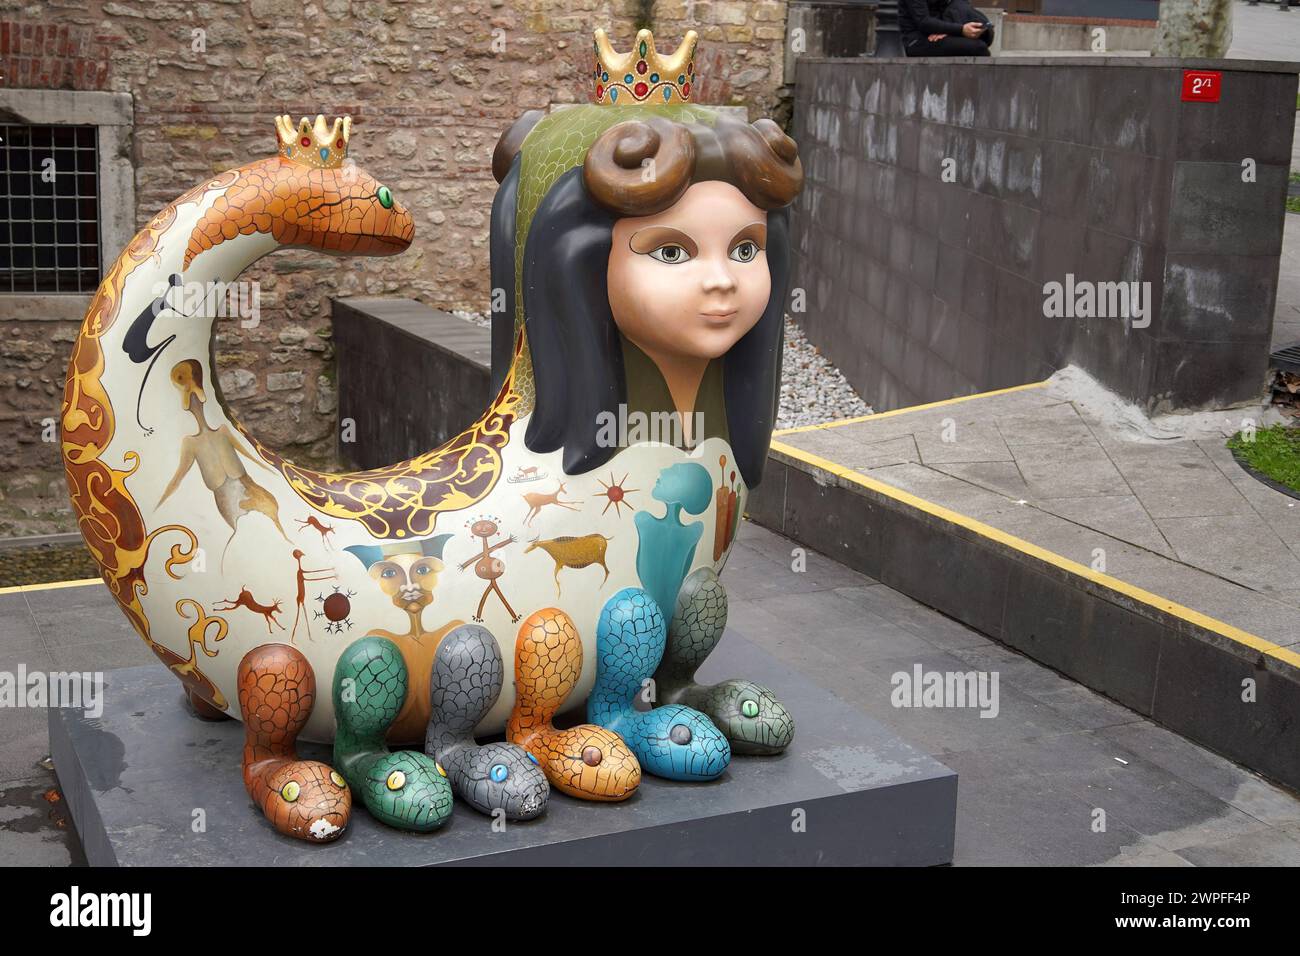 Uniquely Painted Sahmeran, Serpent Goddess, Statues in Istanbul Stock Photo